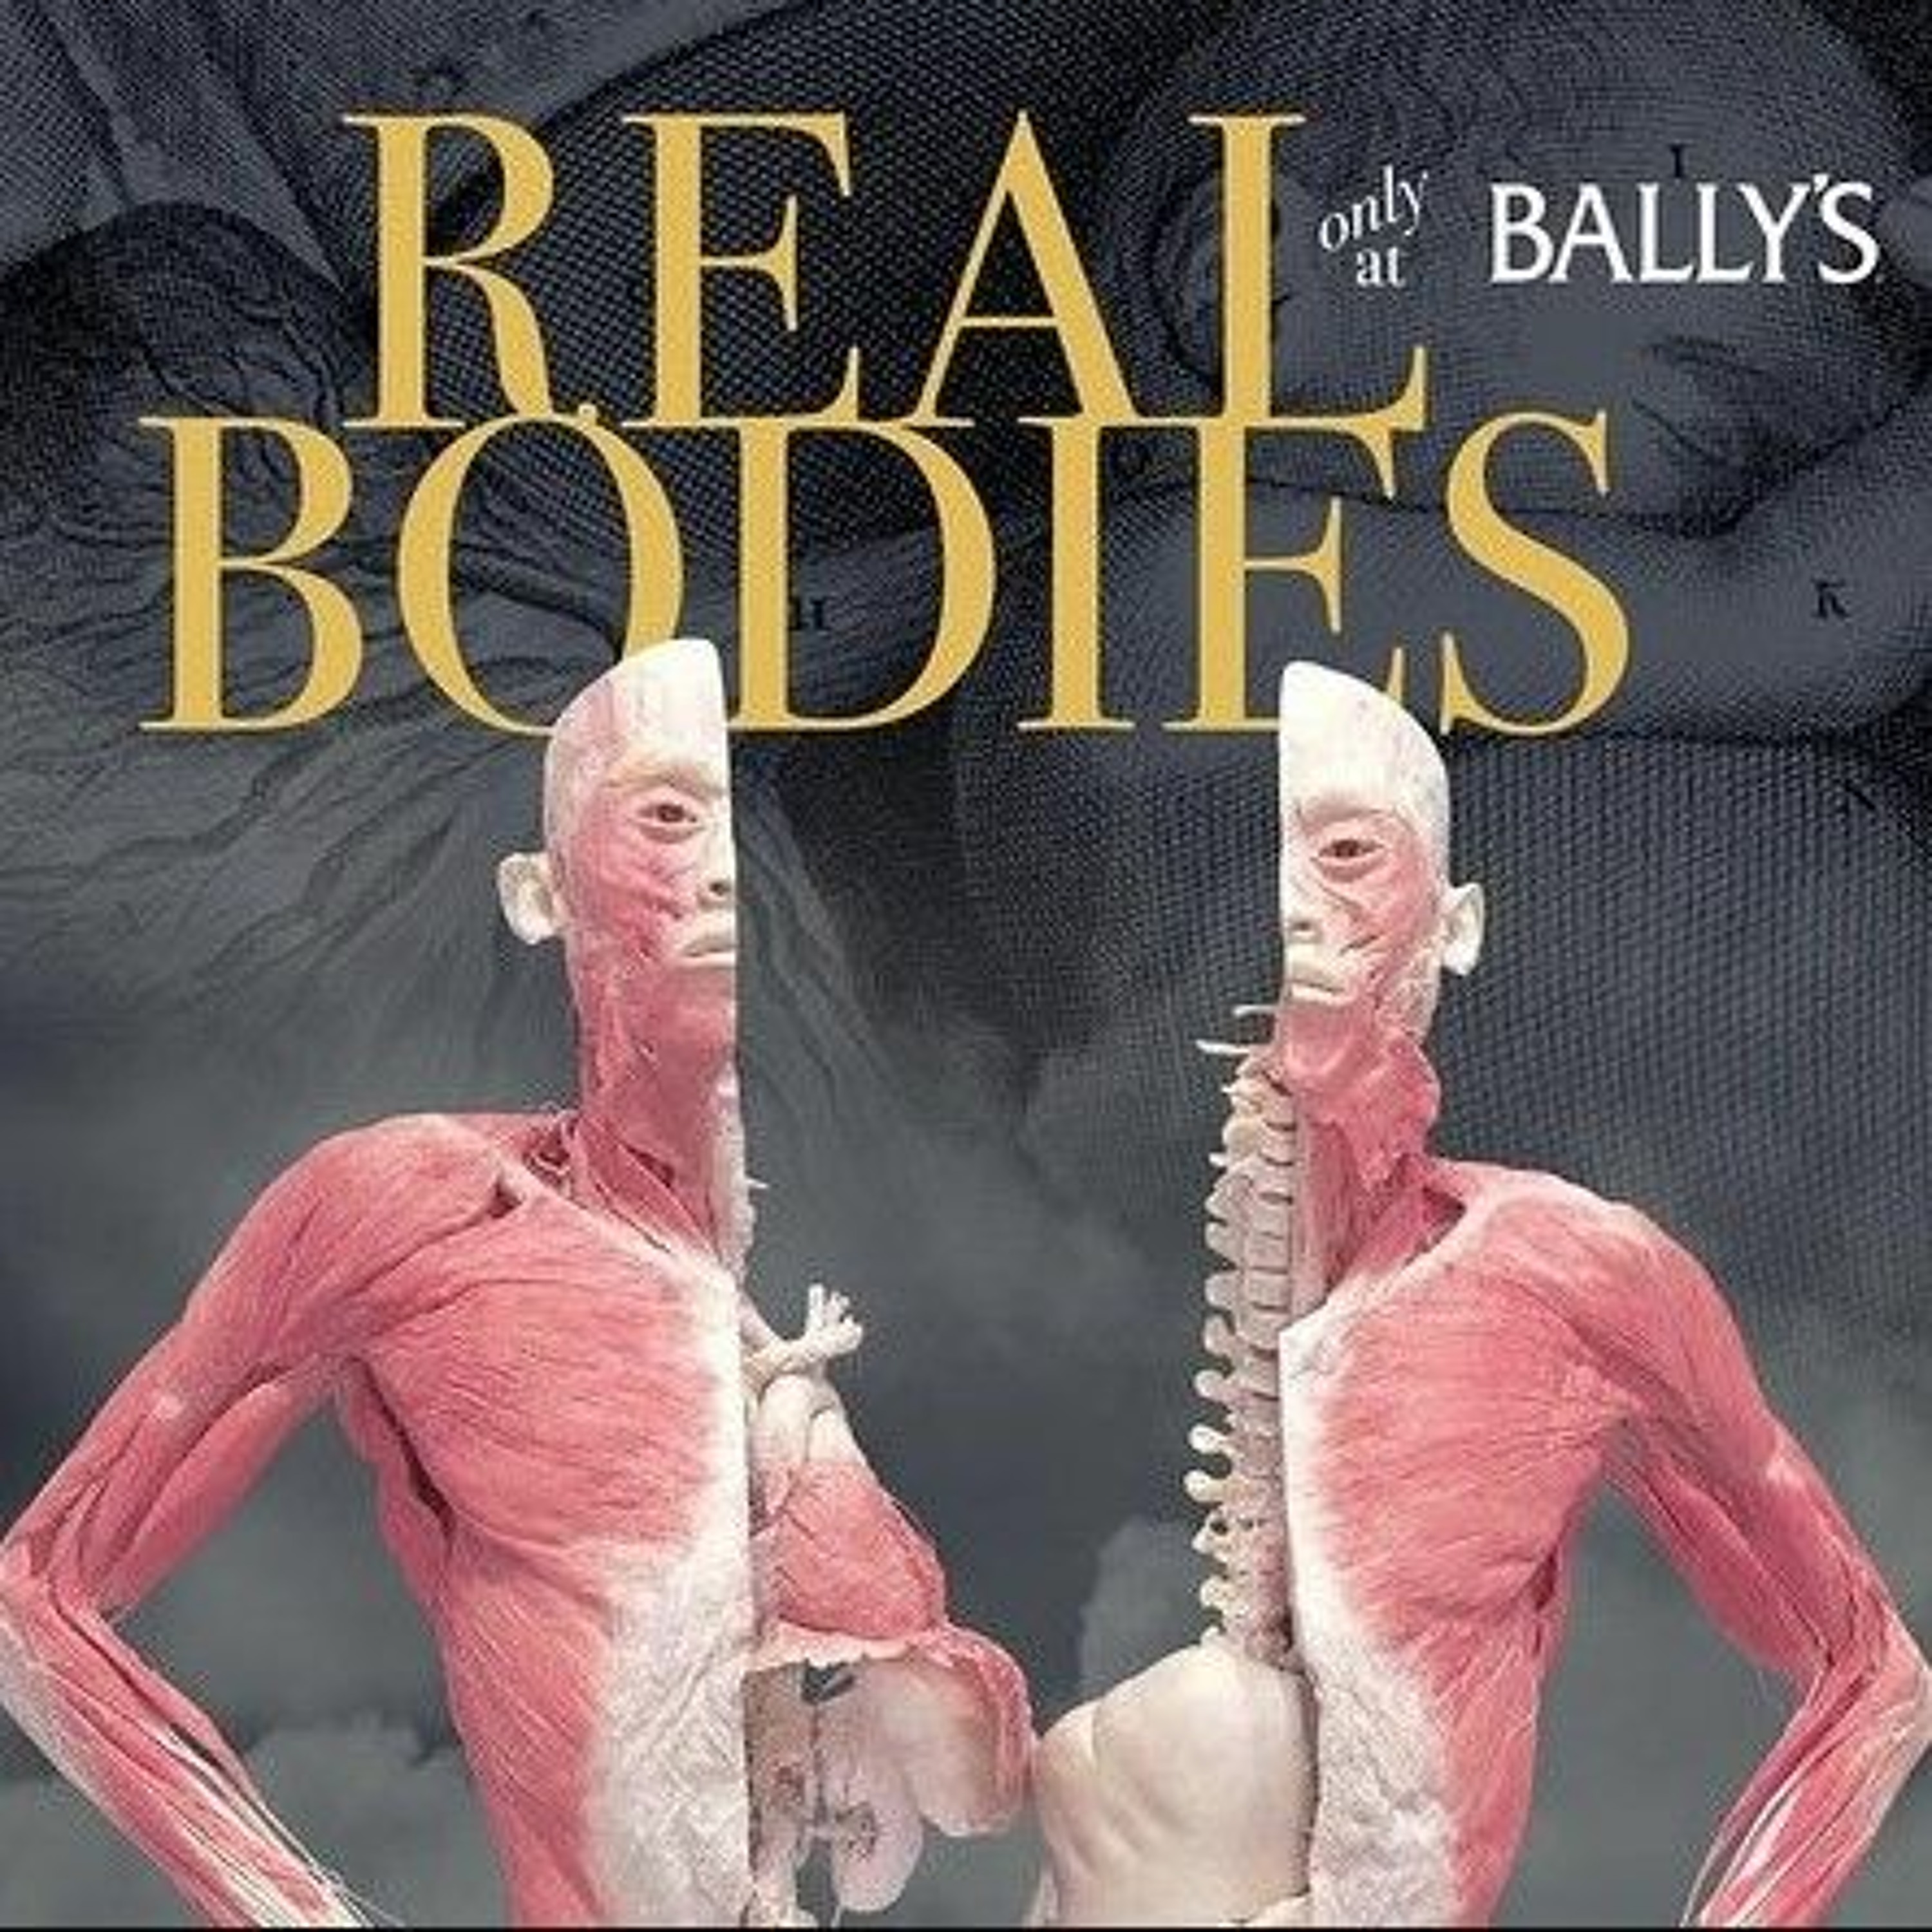 VNS PODCAST - FROM AUGUST 14, 2021 - TOM ZALLER_REAL BODIES